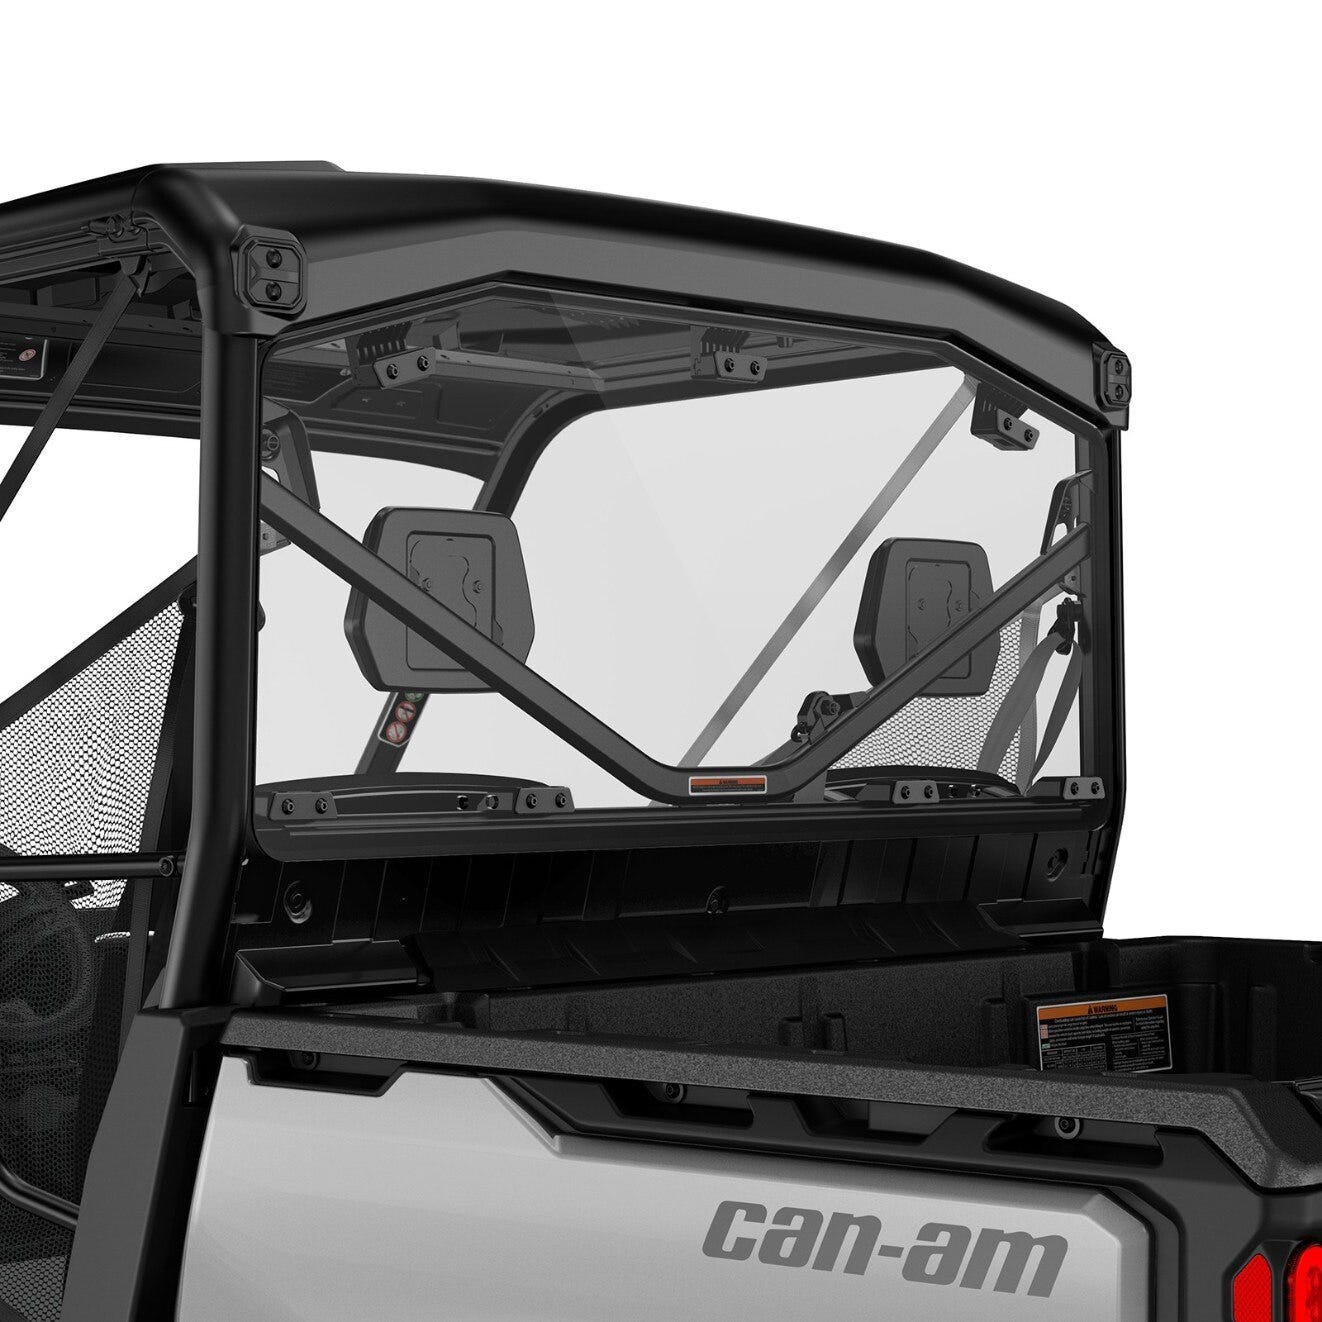 Can-am Rear Polycarbonate Window 715007081 - The Parts Lodge